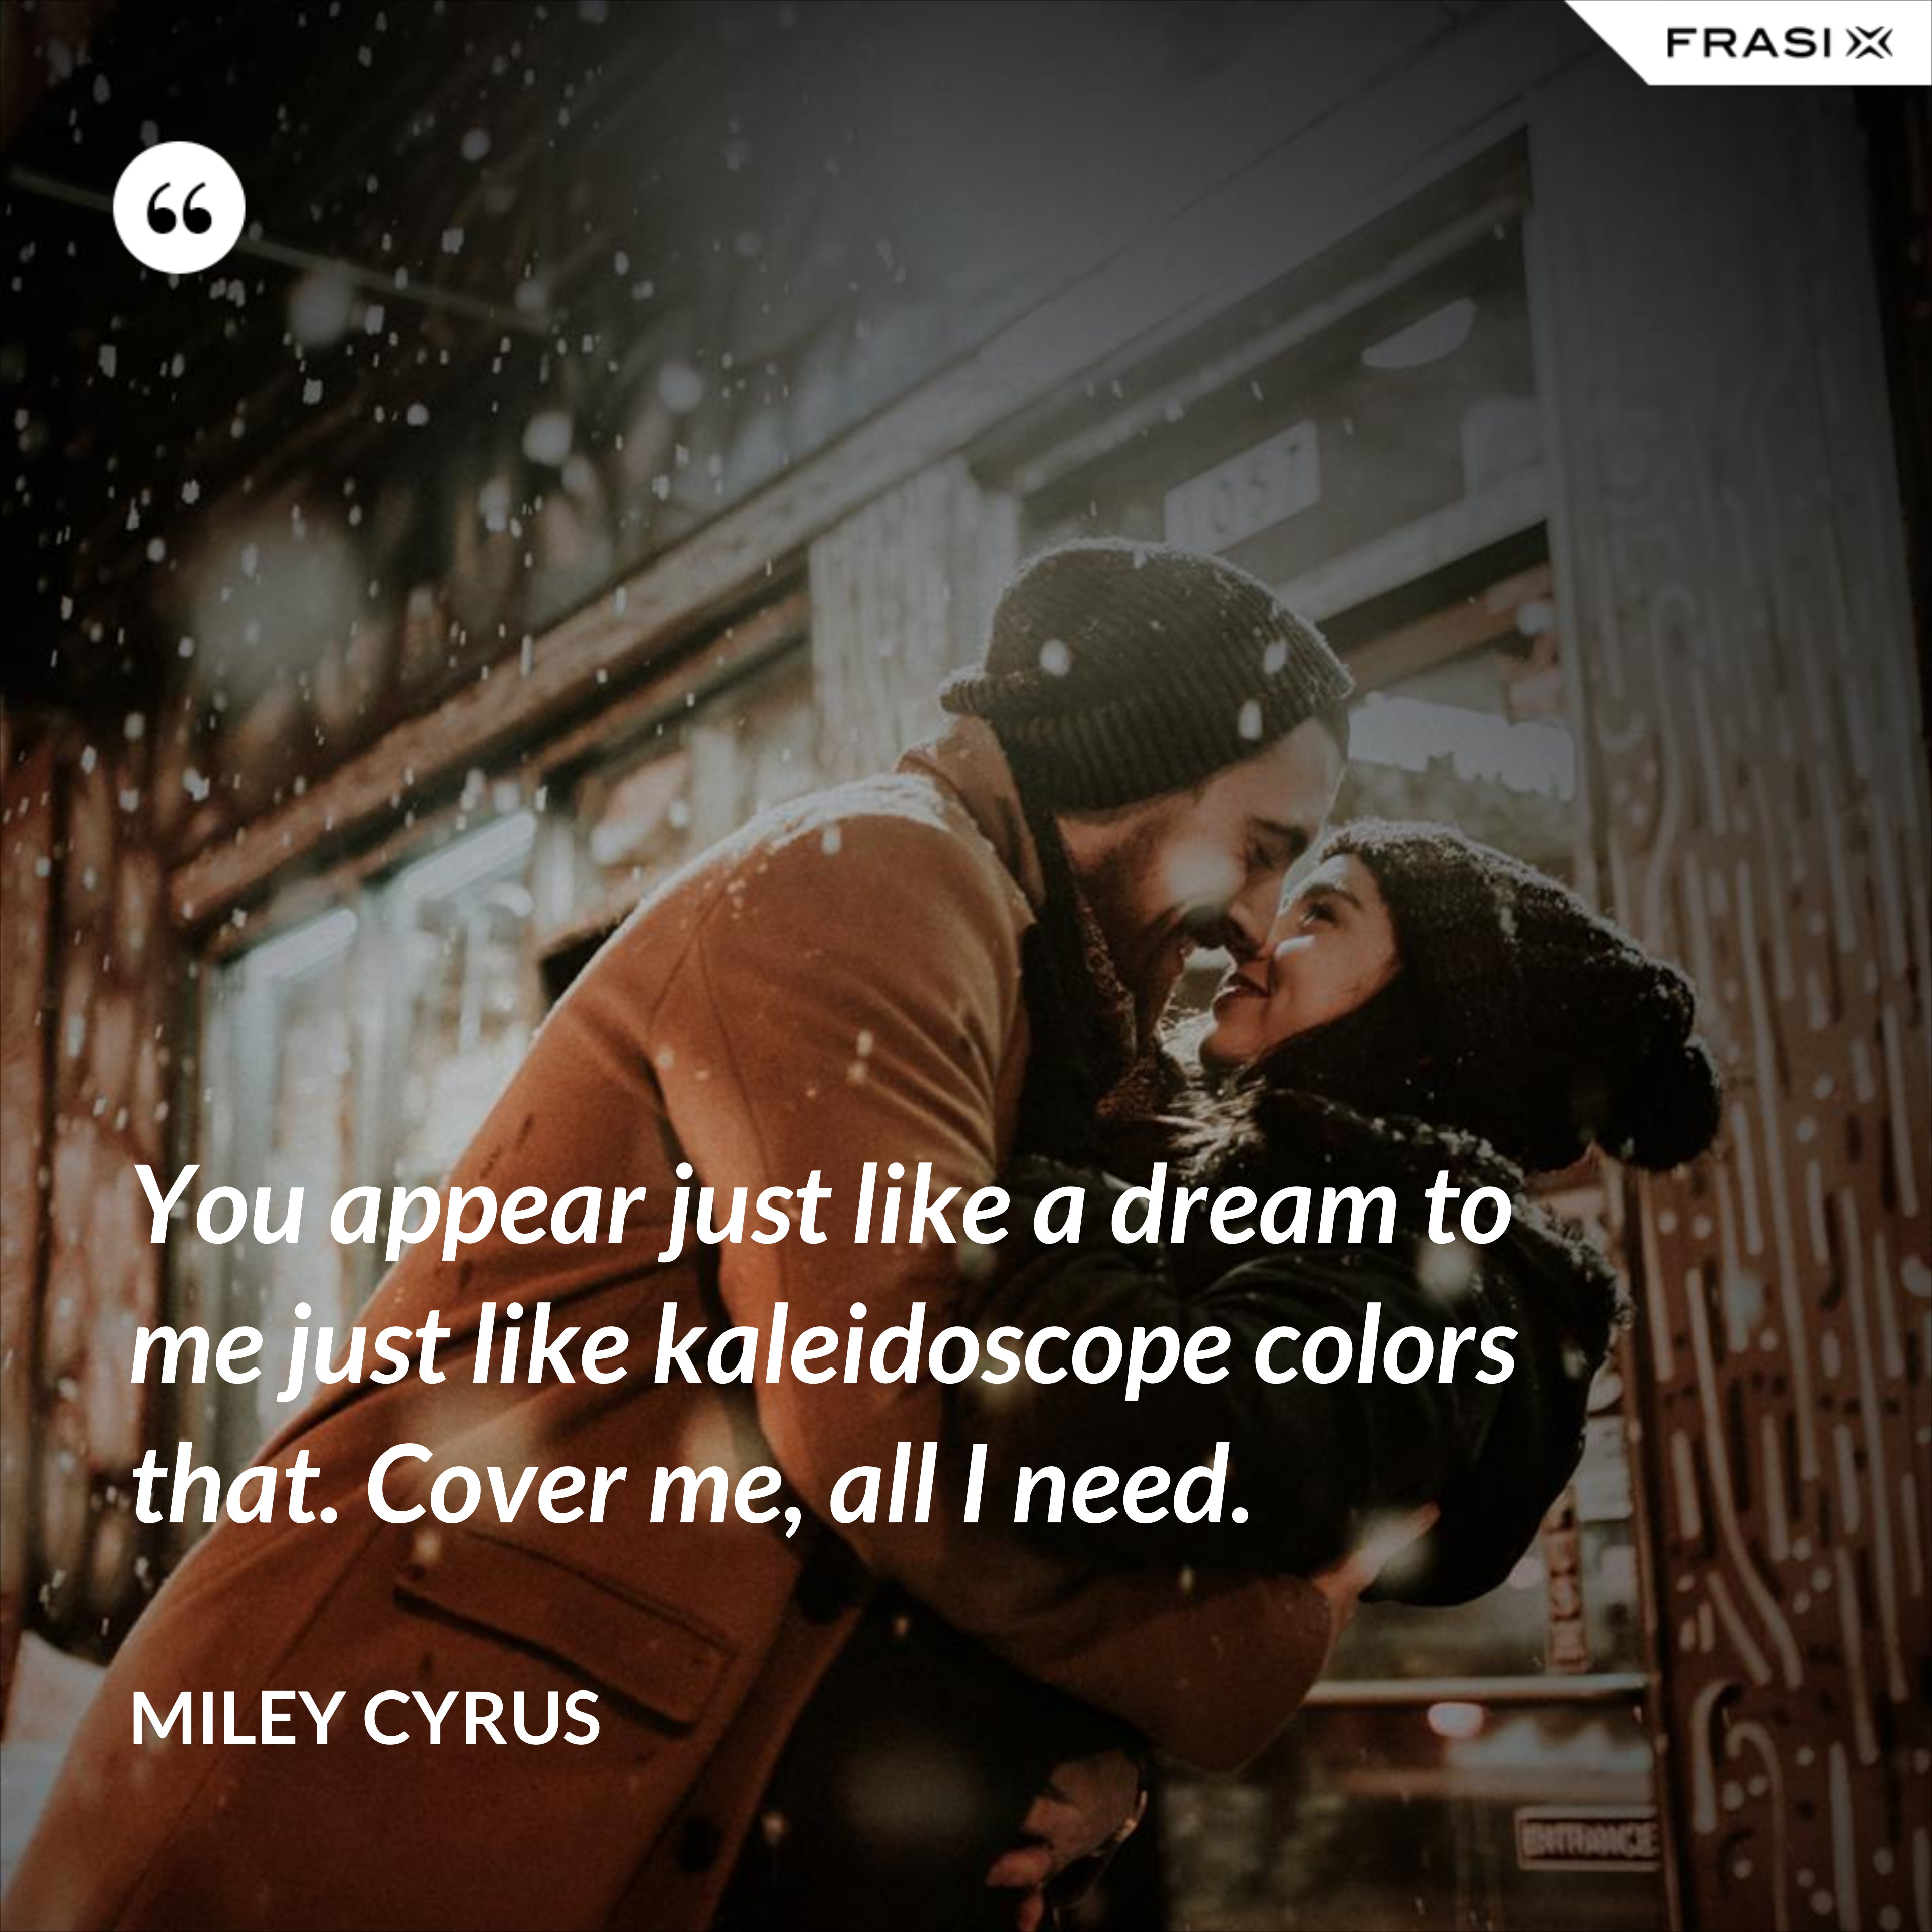 You appear just like a dream to me just like kaleidoscope colors that. Cover me, all I need. - Miley Cyrus